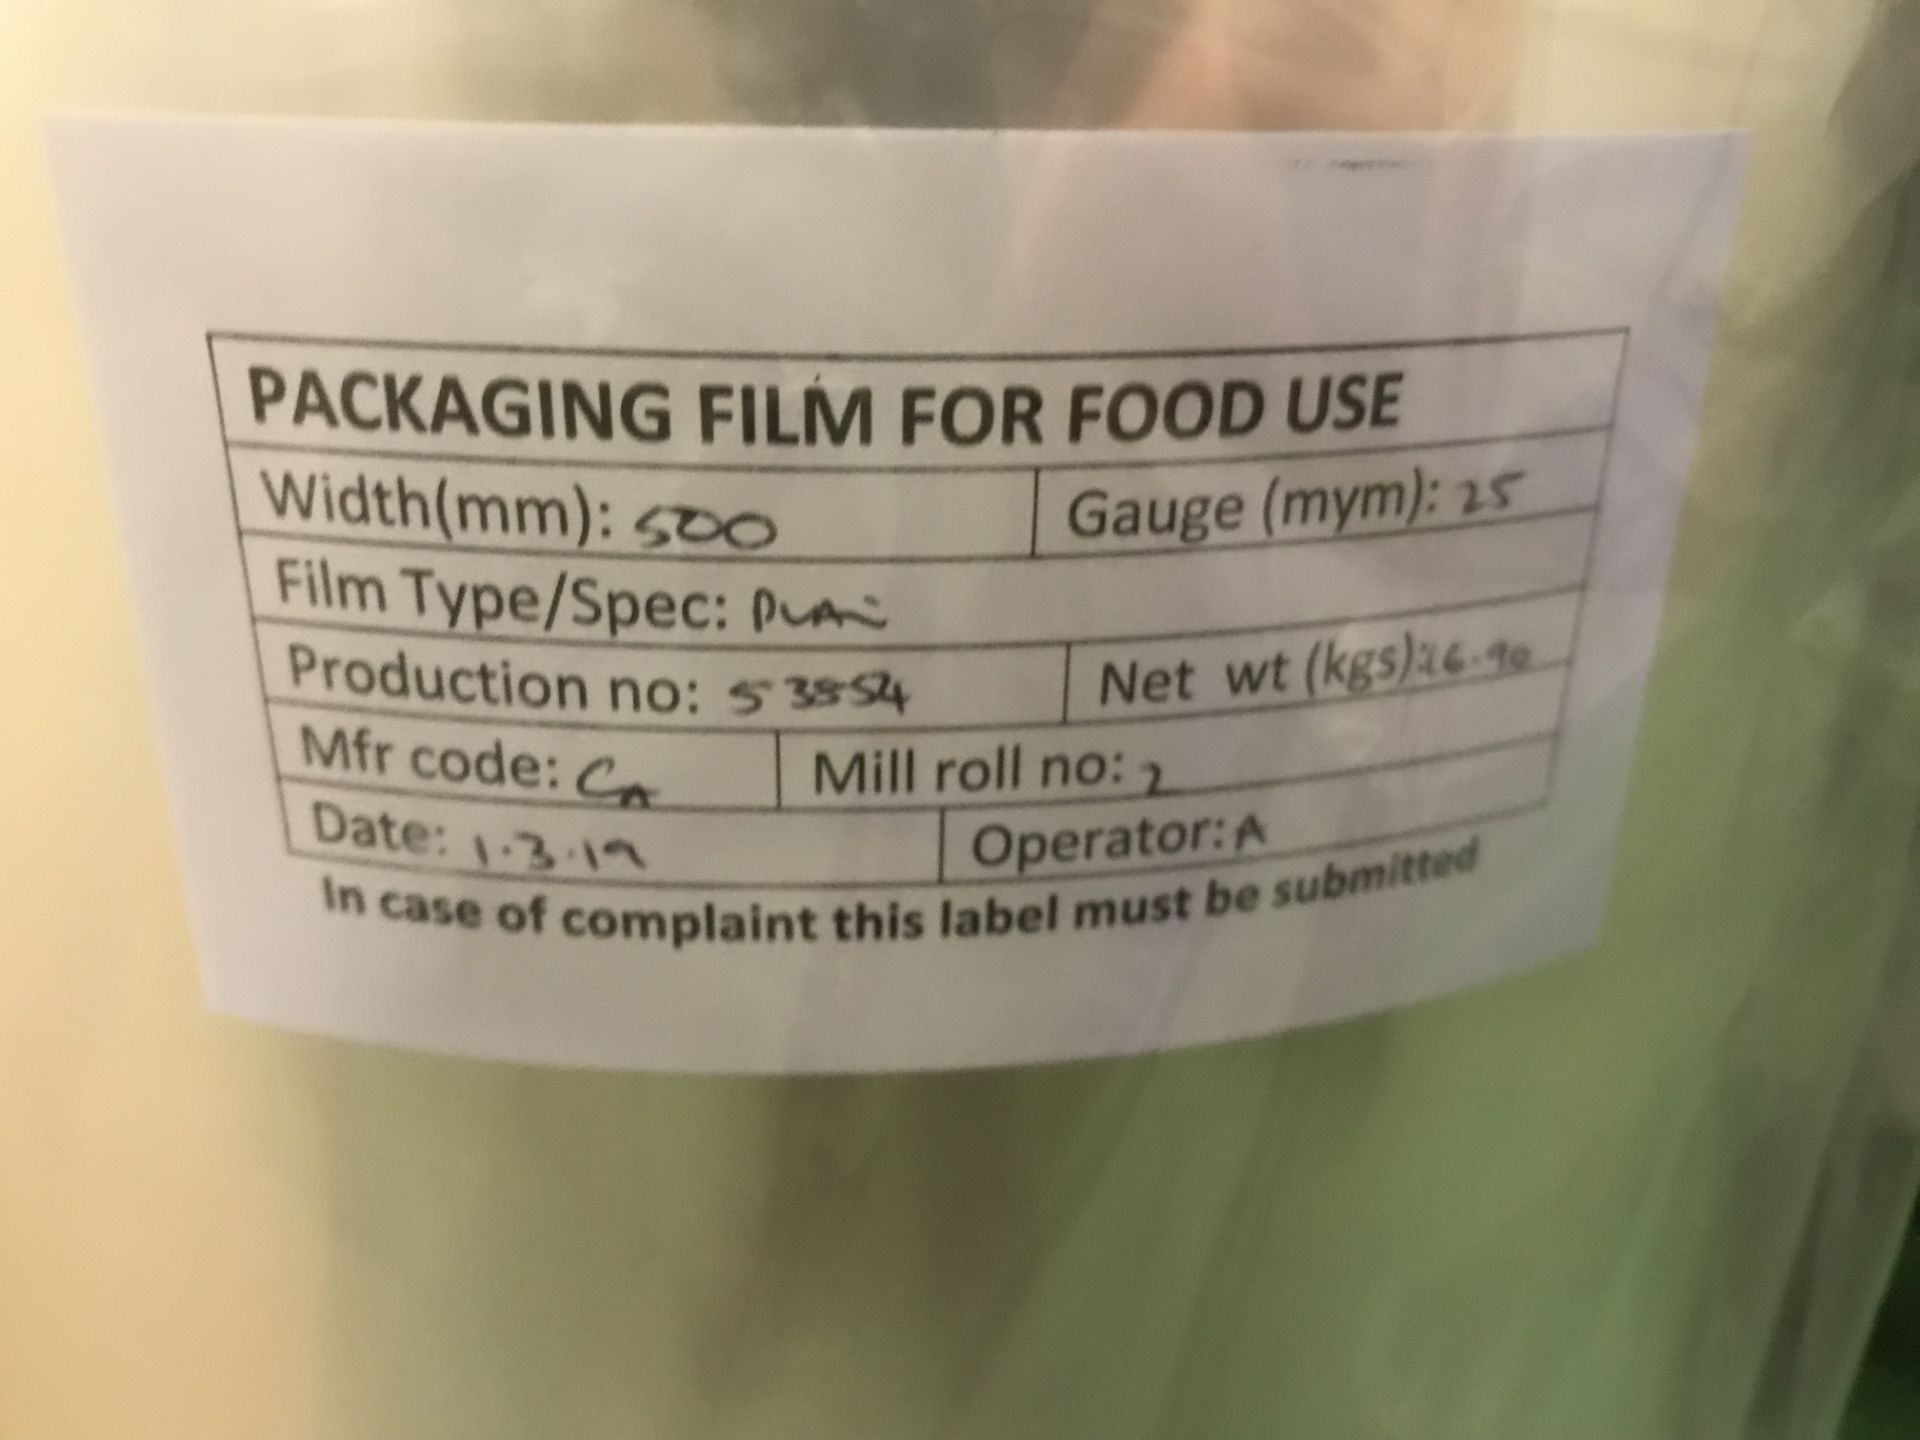 7 x Rolls of Packaging Film For Food Use | 5 x 450mm & 2 x 500mm Width - Image 3 of 3